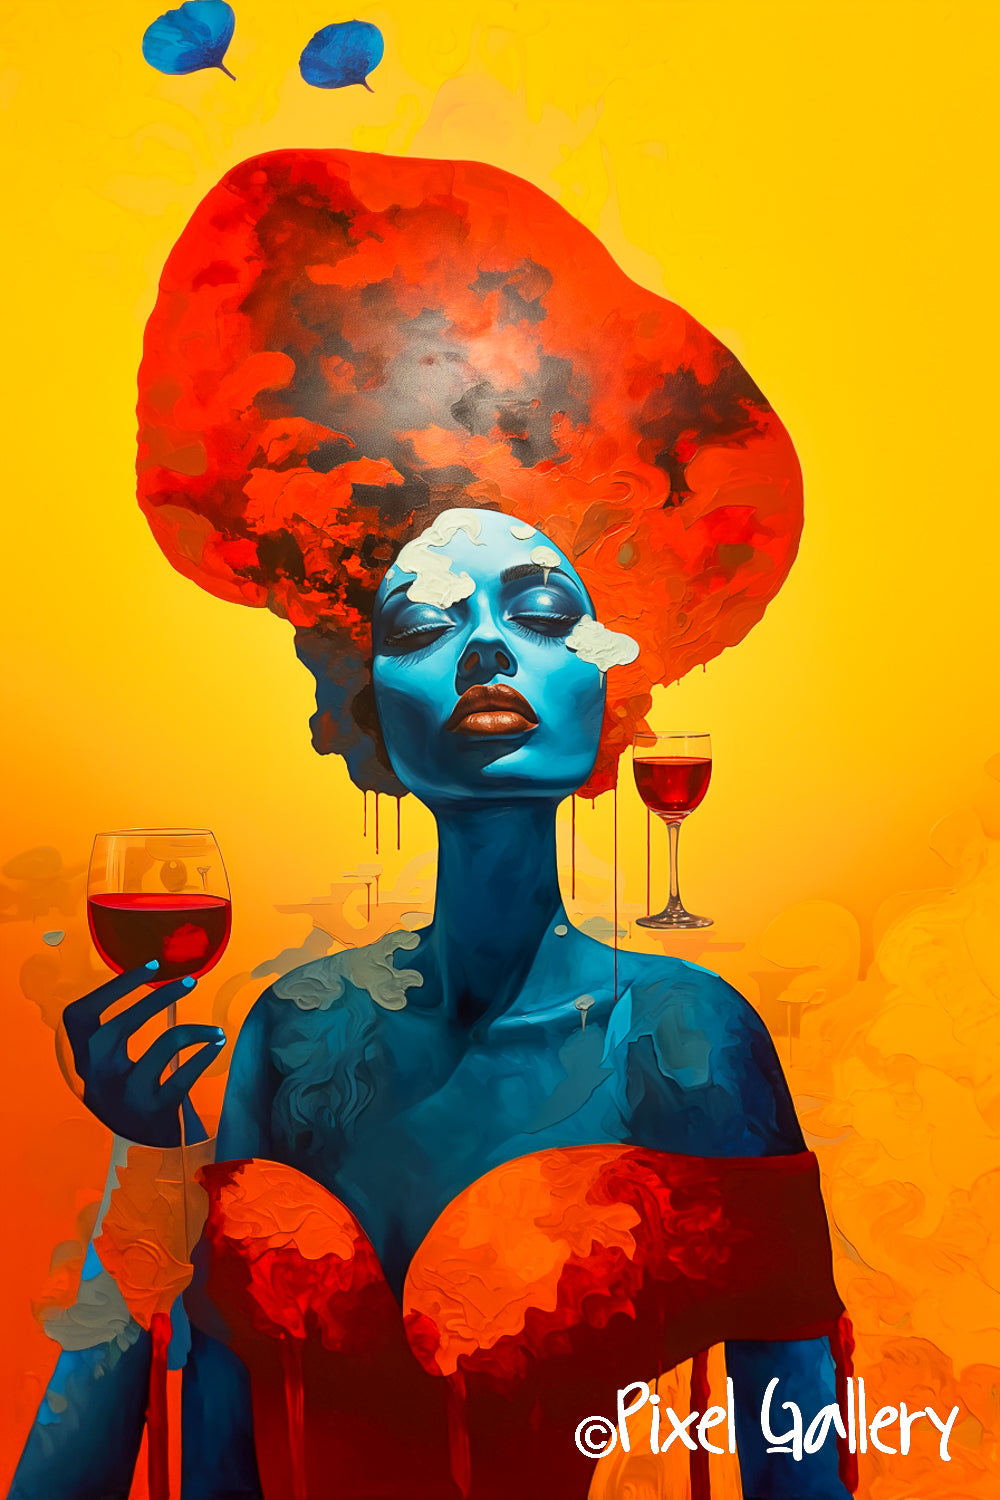 Ai Art image of a woman with a wine glass - Pixel Gallery